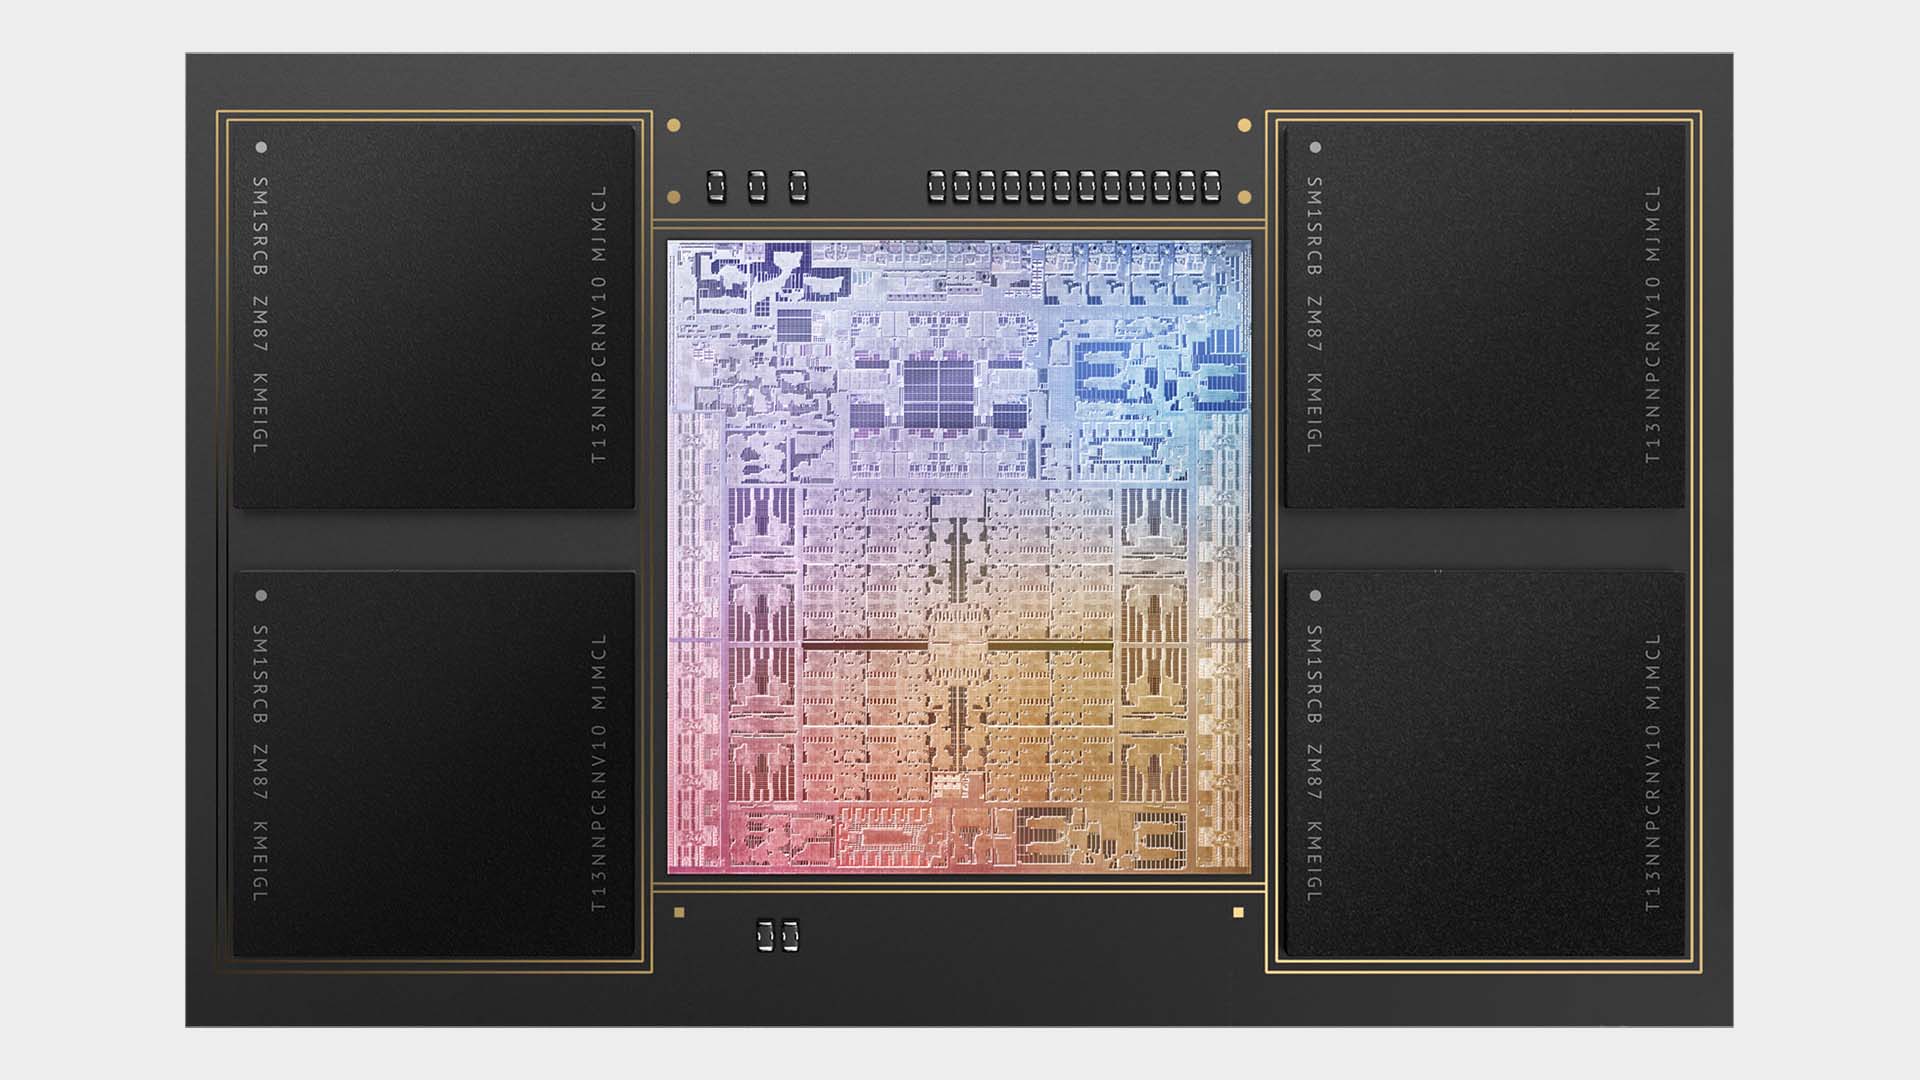 Apple Claims Its New M1 Max Chip Is A Match For Nvidia's RTX 3080, But Should We Believe It? thumbnail